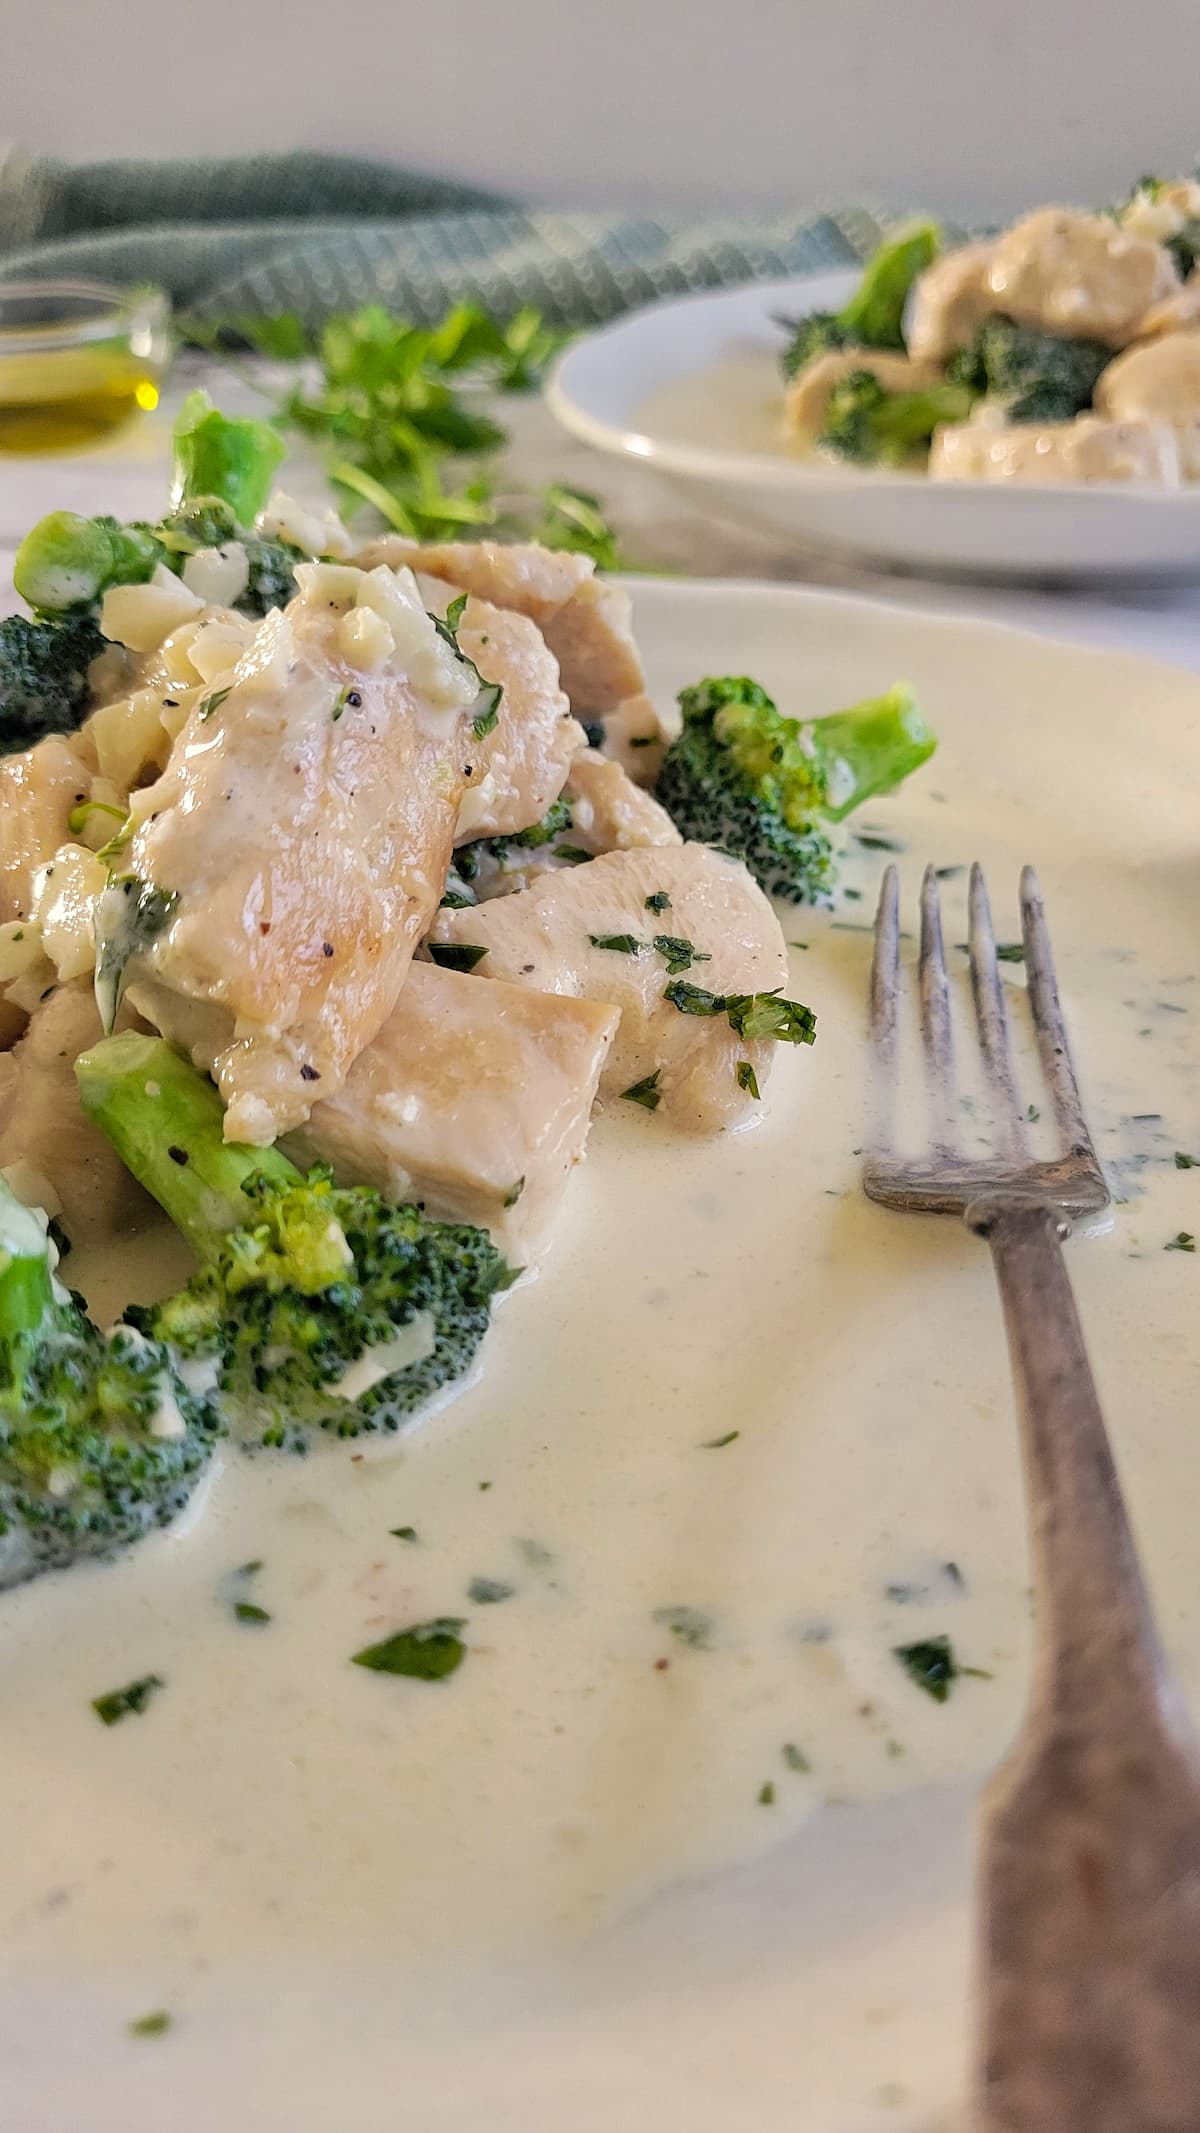 side view of a plate of chicken and broccoli with alfredo sauce, another plate in the background